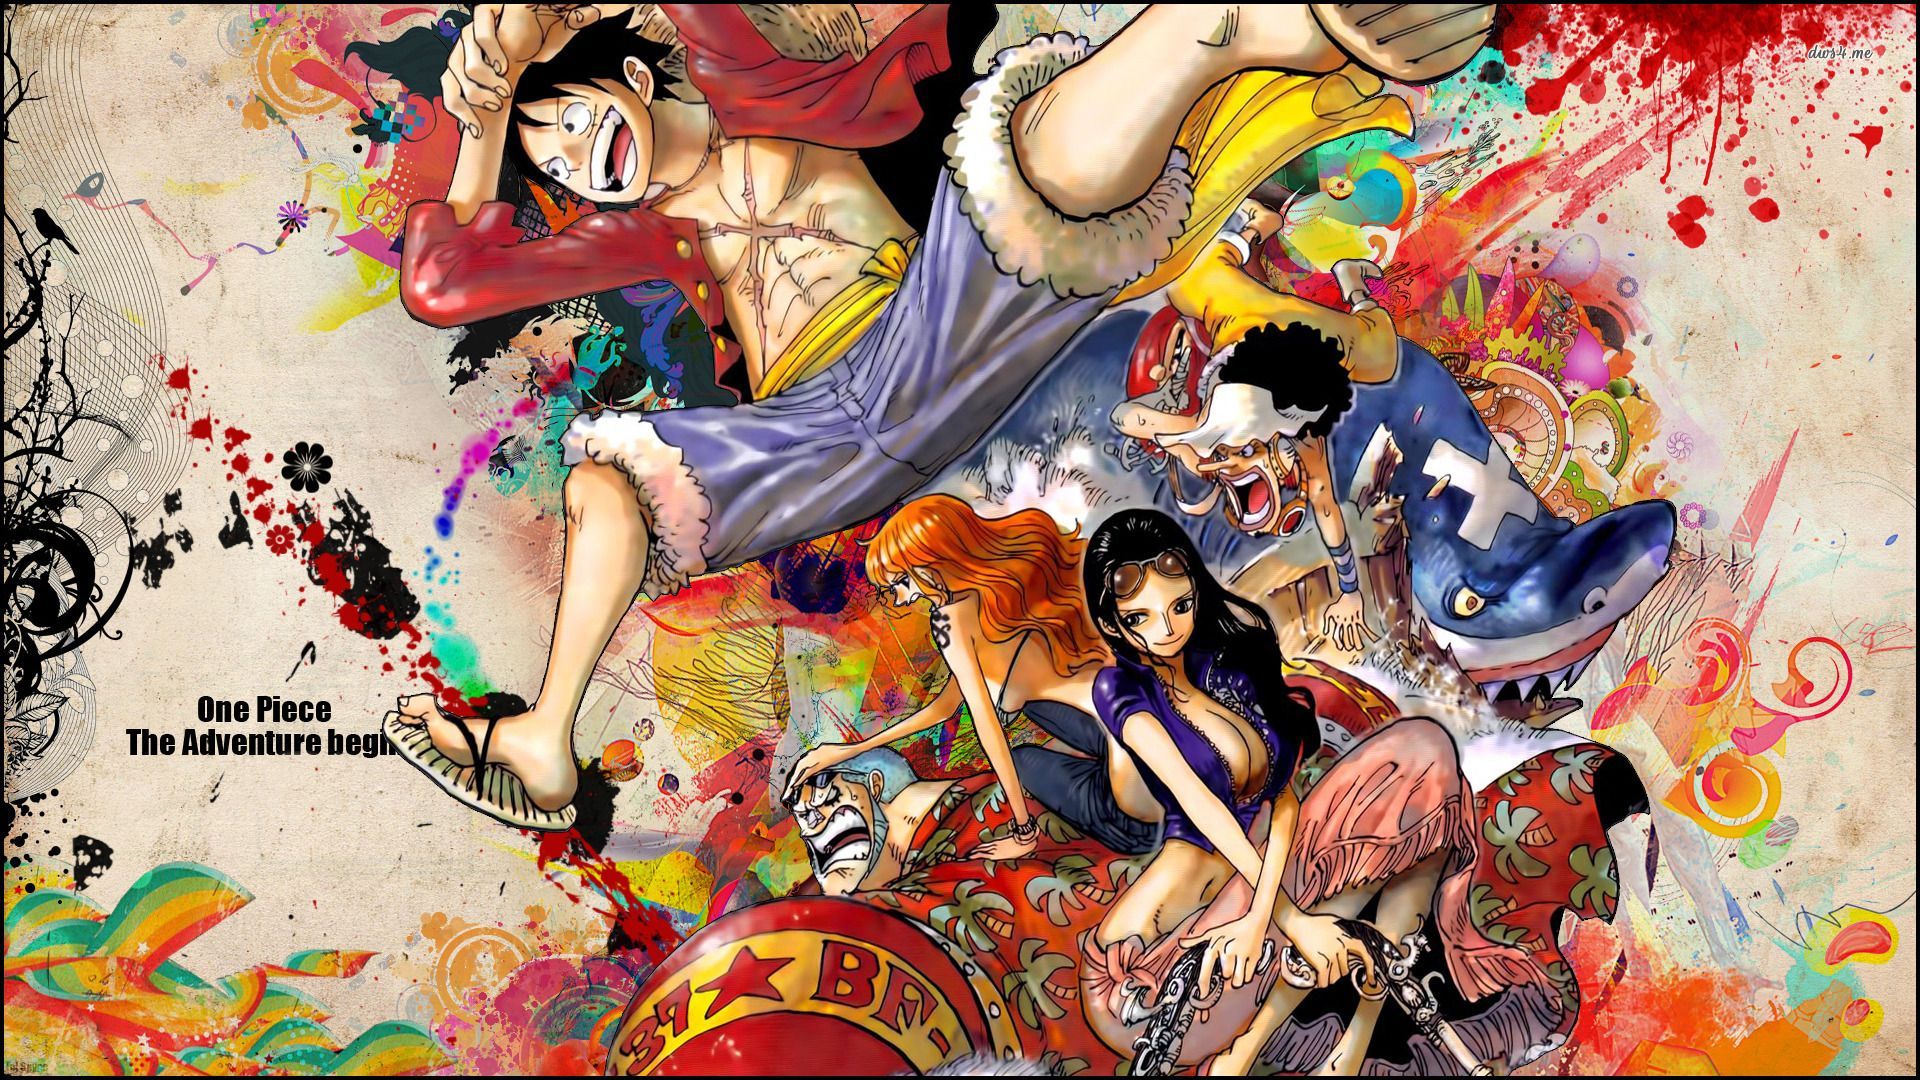 One Piece on Pinterest | Hd Wallpaper, Wallpapers and Boas